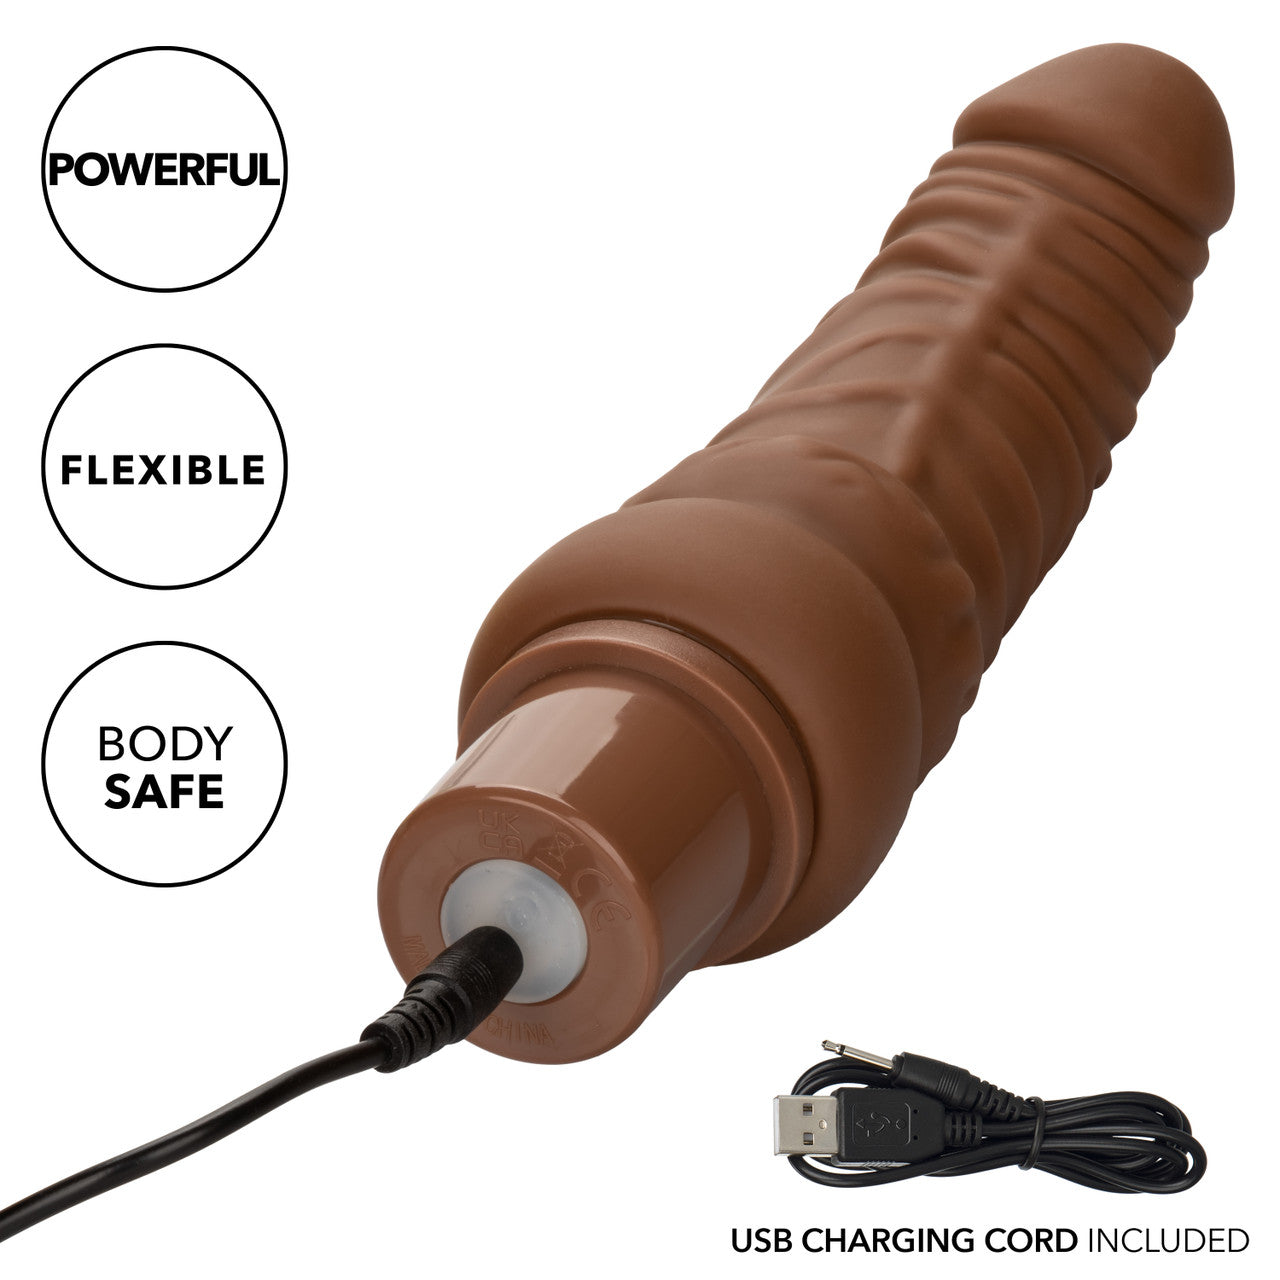 Rechargeable Power Stud® Cliterrific™ - Brown